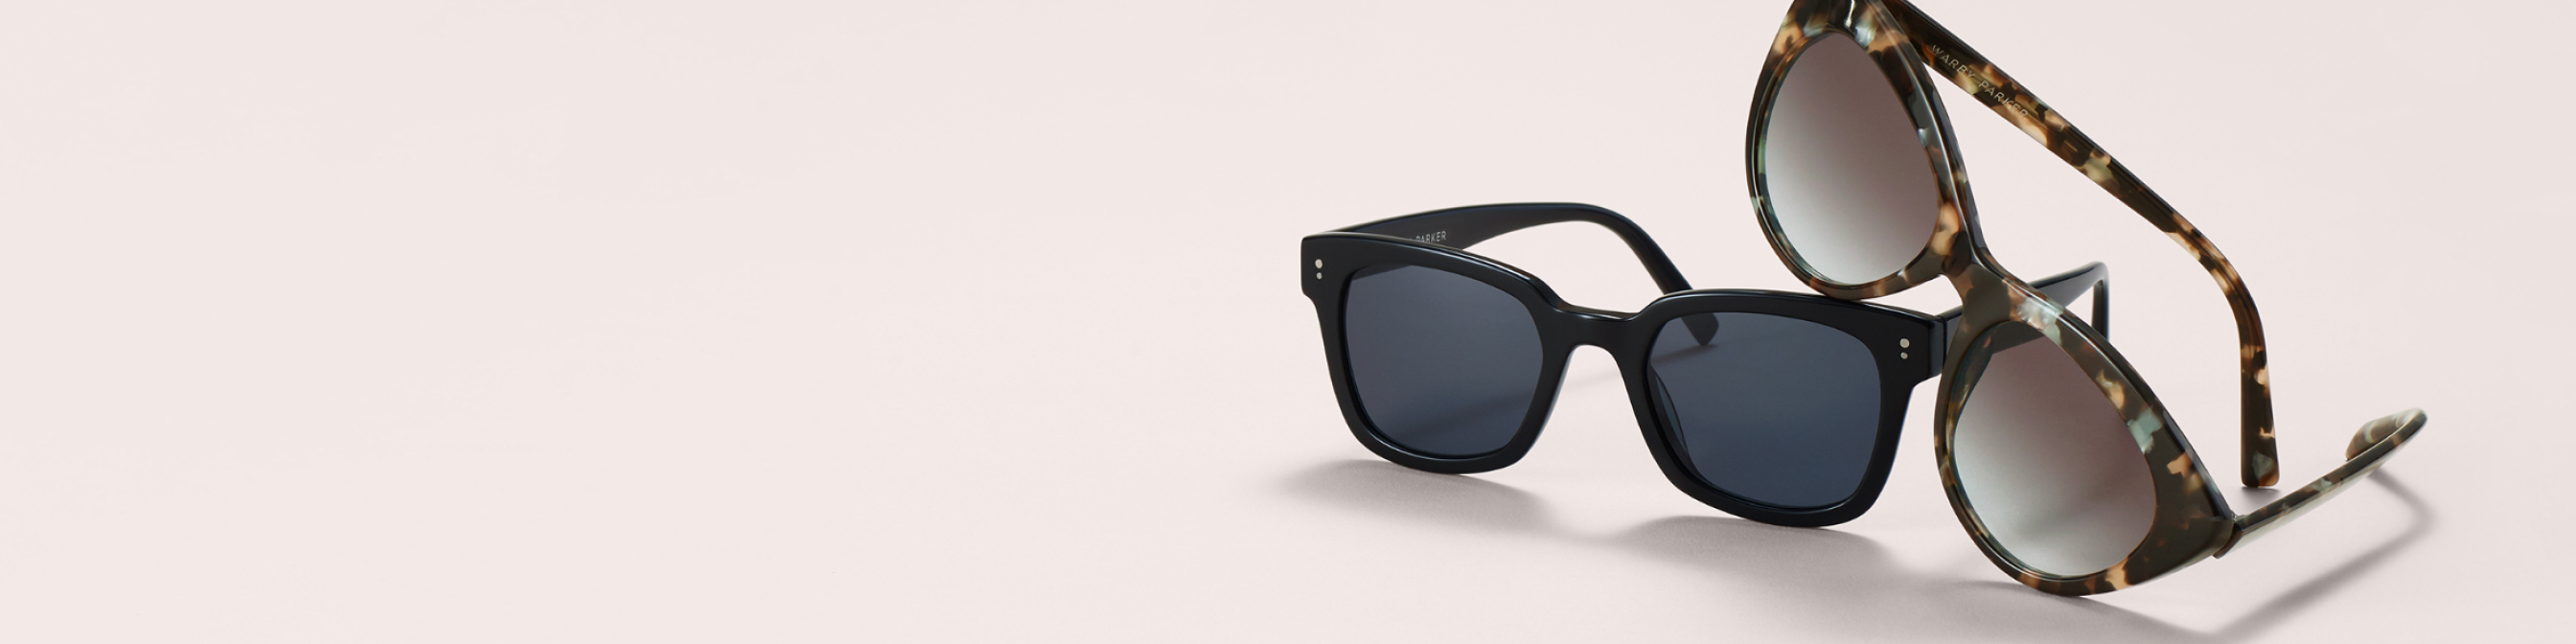 Two sunglasses in classic square and round shapes